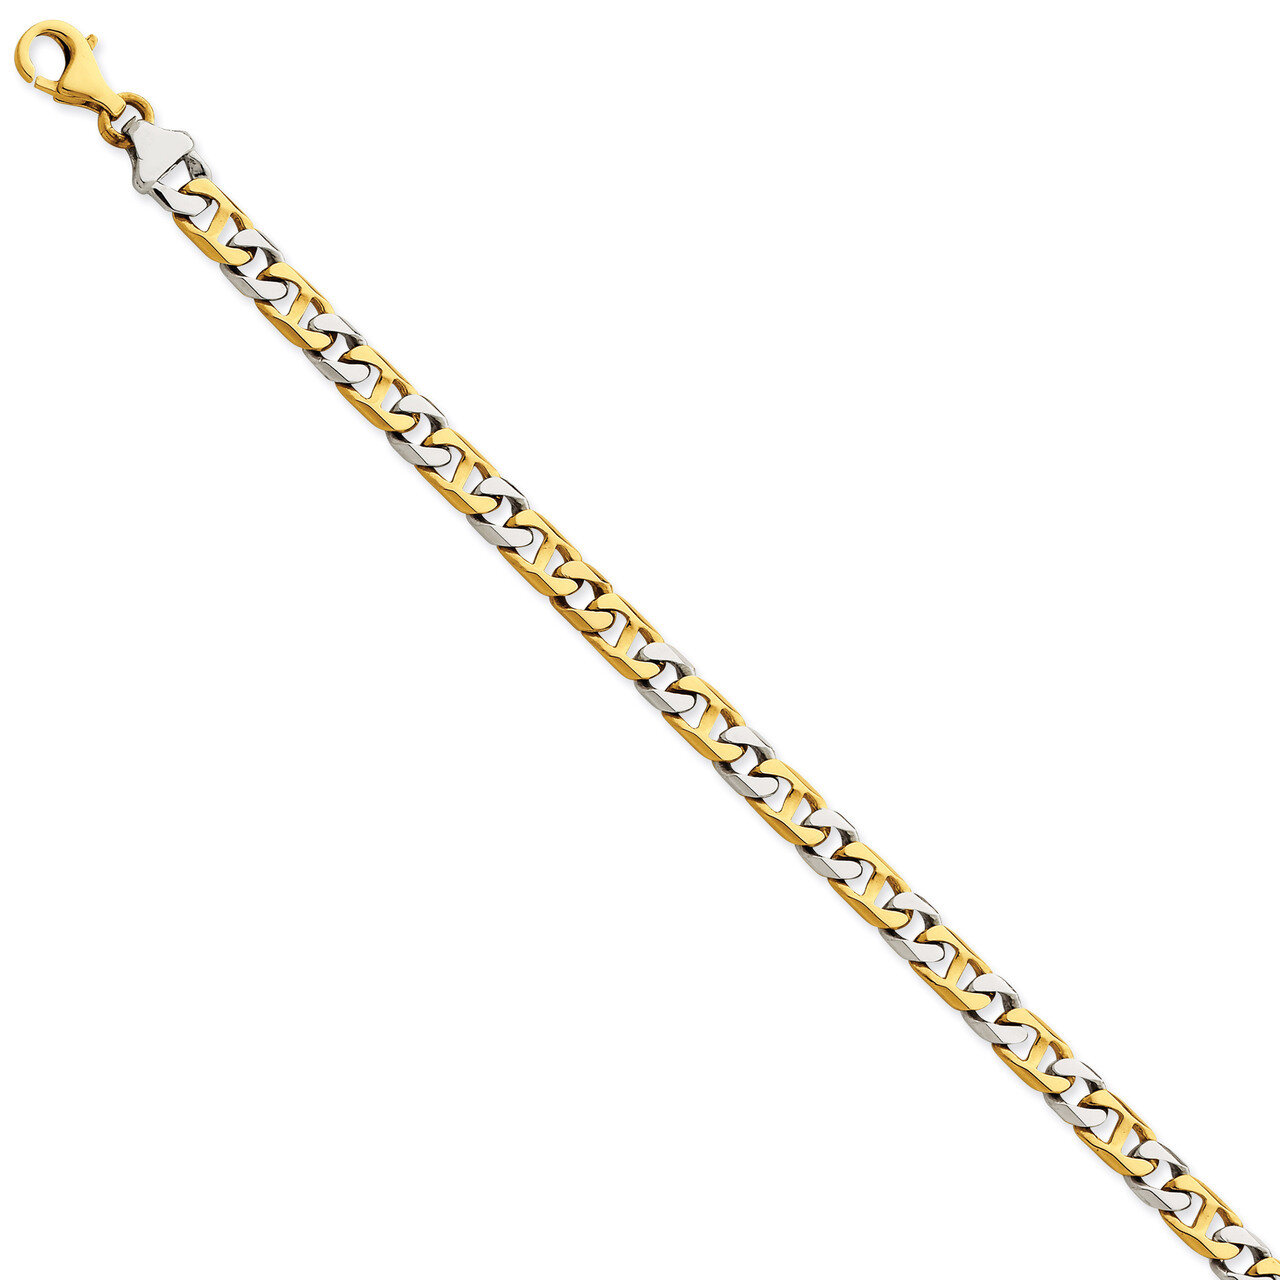 6mm Hand-Polished Fancy Link Chain 22 Inch 14k Two-Tone Gold LK259-22